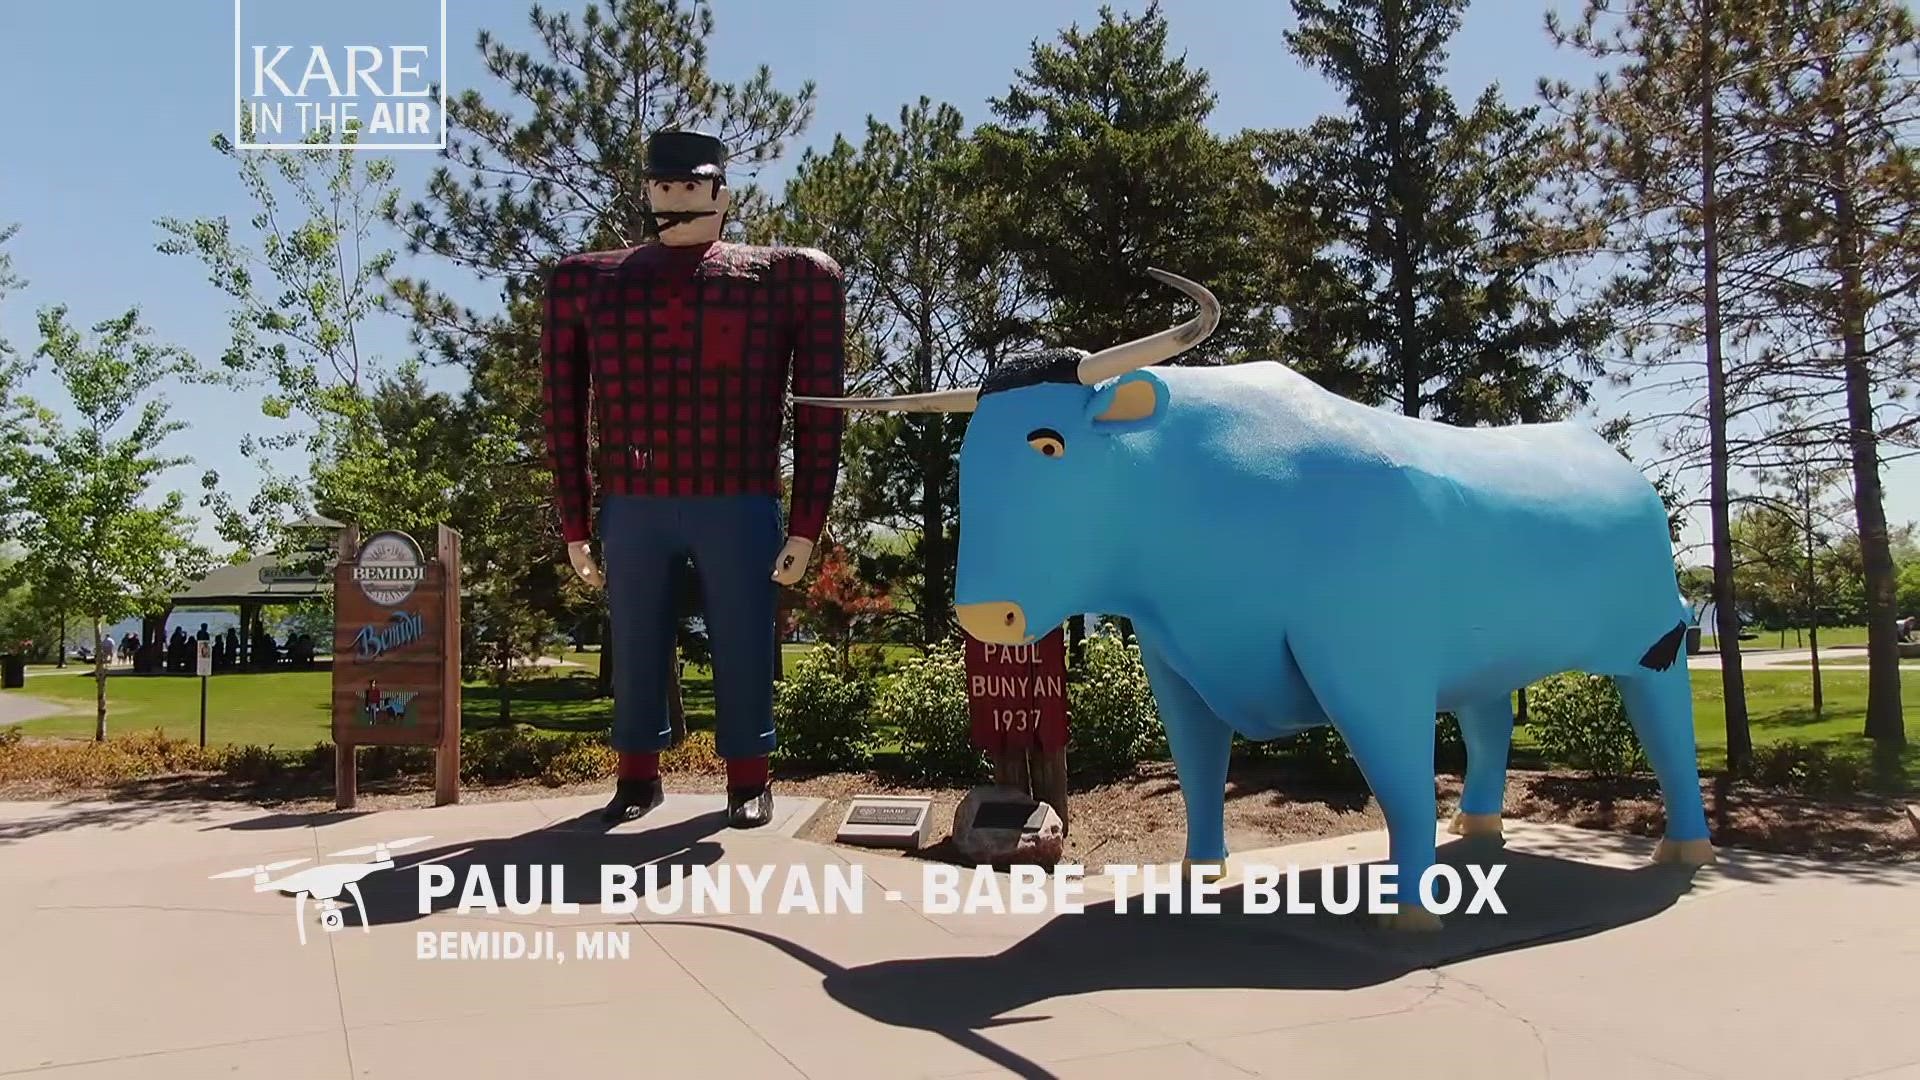 There are more than a few statues of Paul Bunyan and his pal Babe the Big Blue Ox littered across Minnesota's landscape, but Bemidji is home to the iconic models.